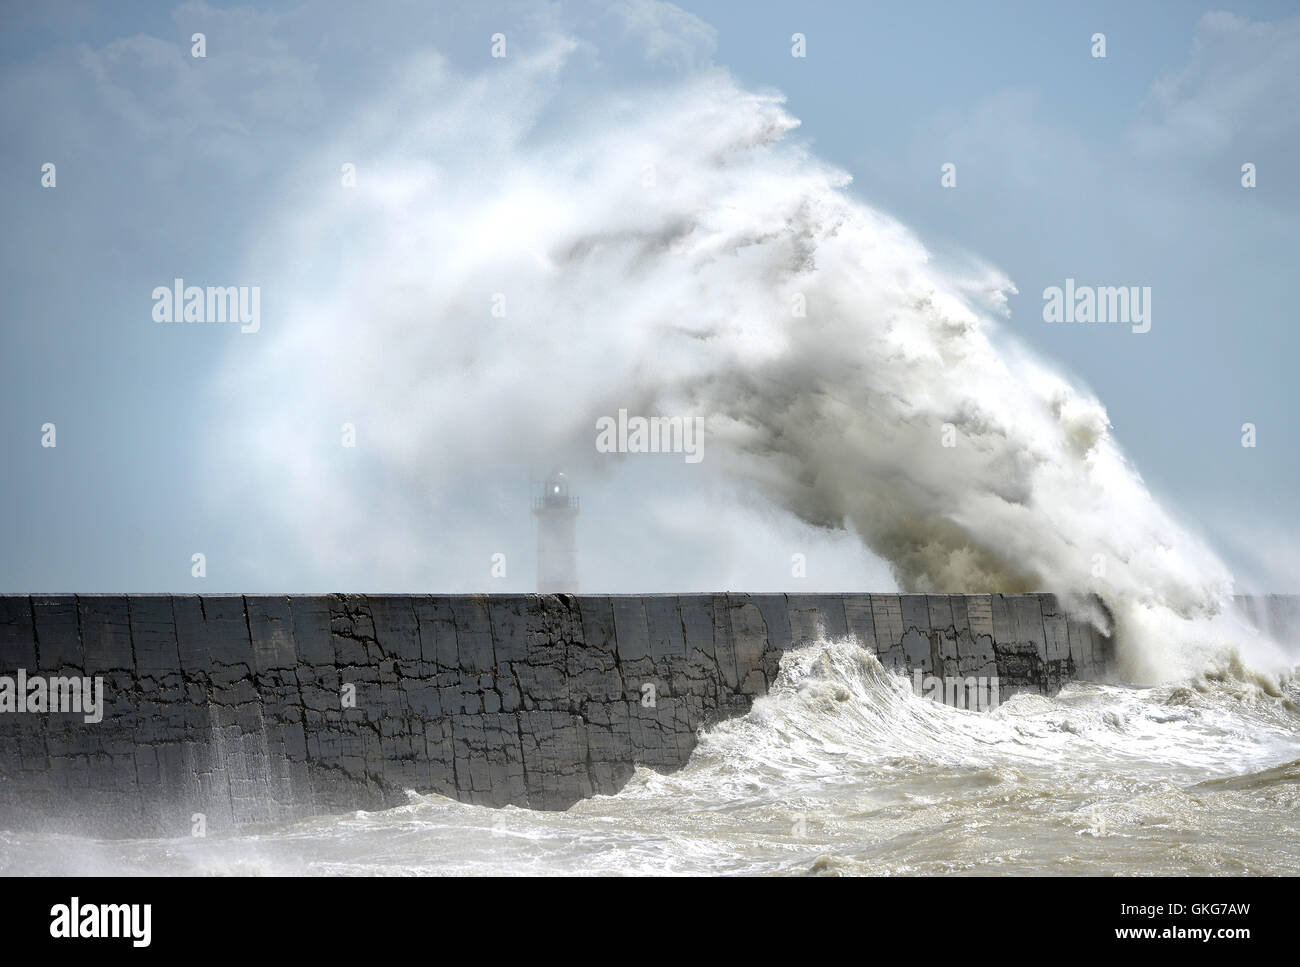 Huge waves hit Newhaven lighthouse, UK, during summer storms Stock Photo